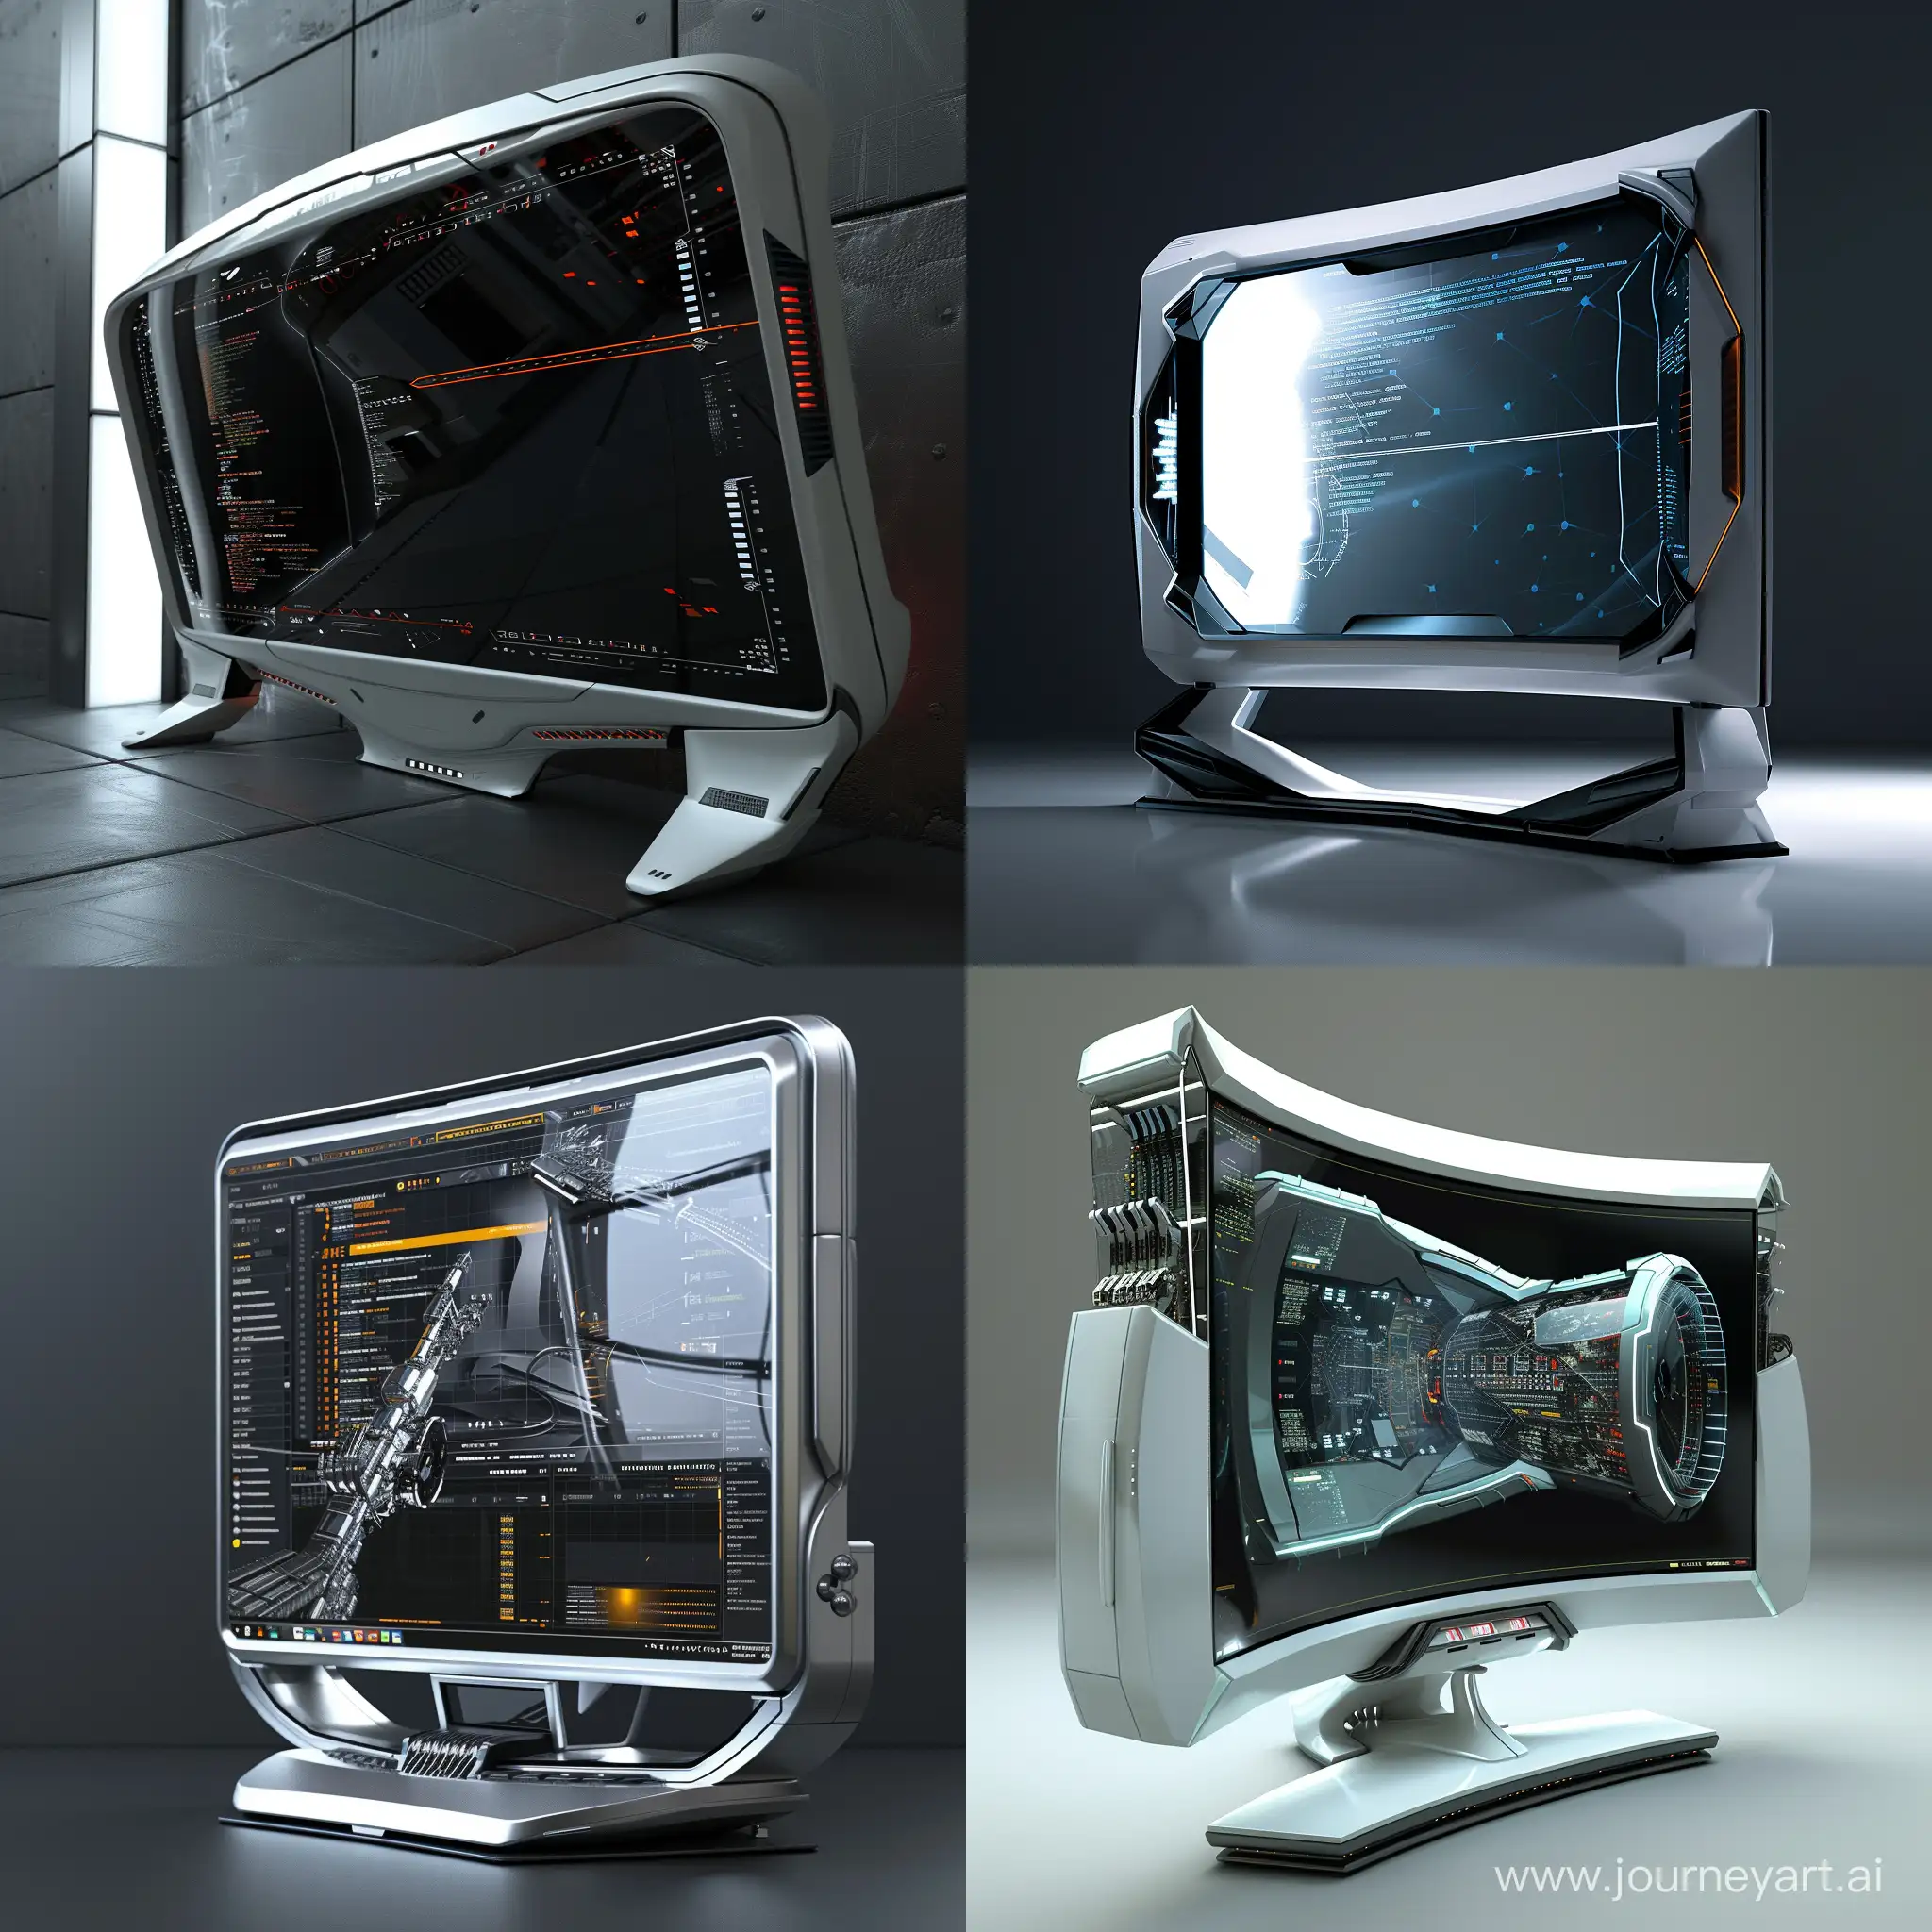 Futuristic-HighTech-PC-Monitor-in-Octane-Render-Style